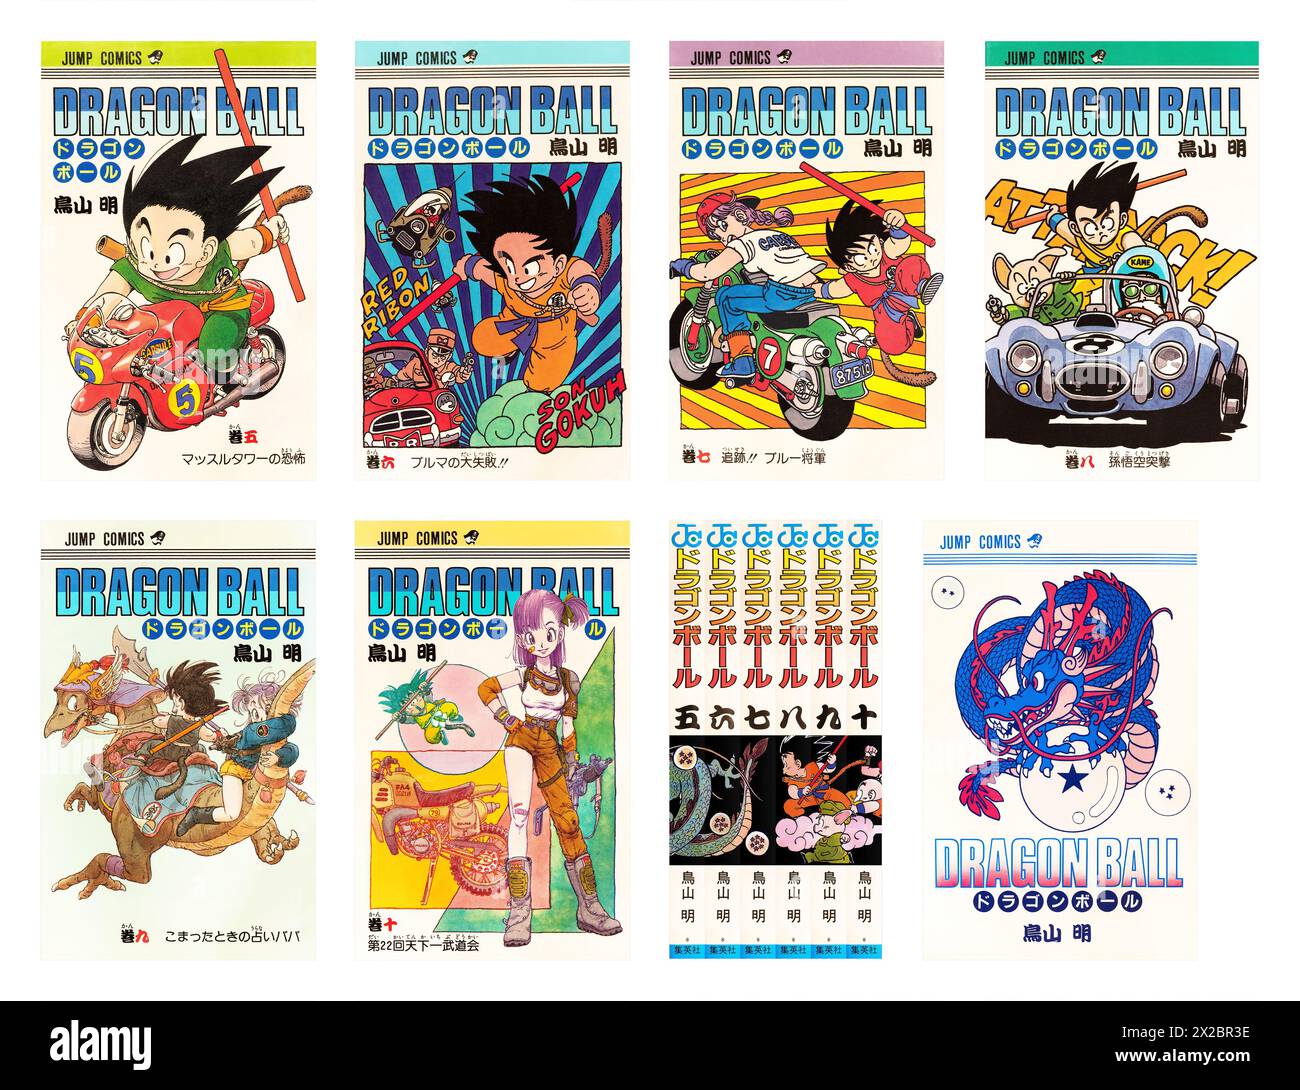 tokyo, japan - sep 10 1985: (set 2/7) First design covers of volumes 05 to 10 of Japanese manga Dragon Ball featuring Red Ribbon Army saga envisioned Stock Photo